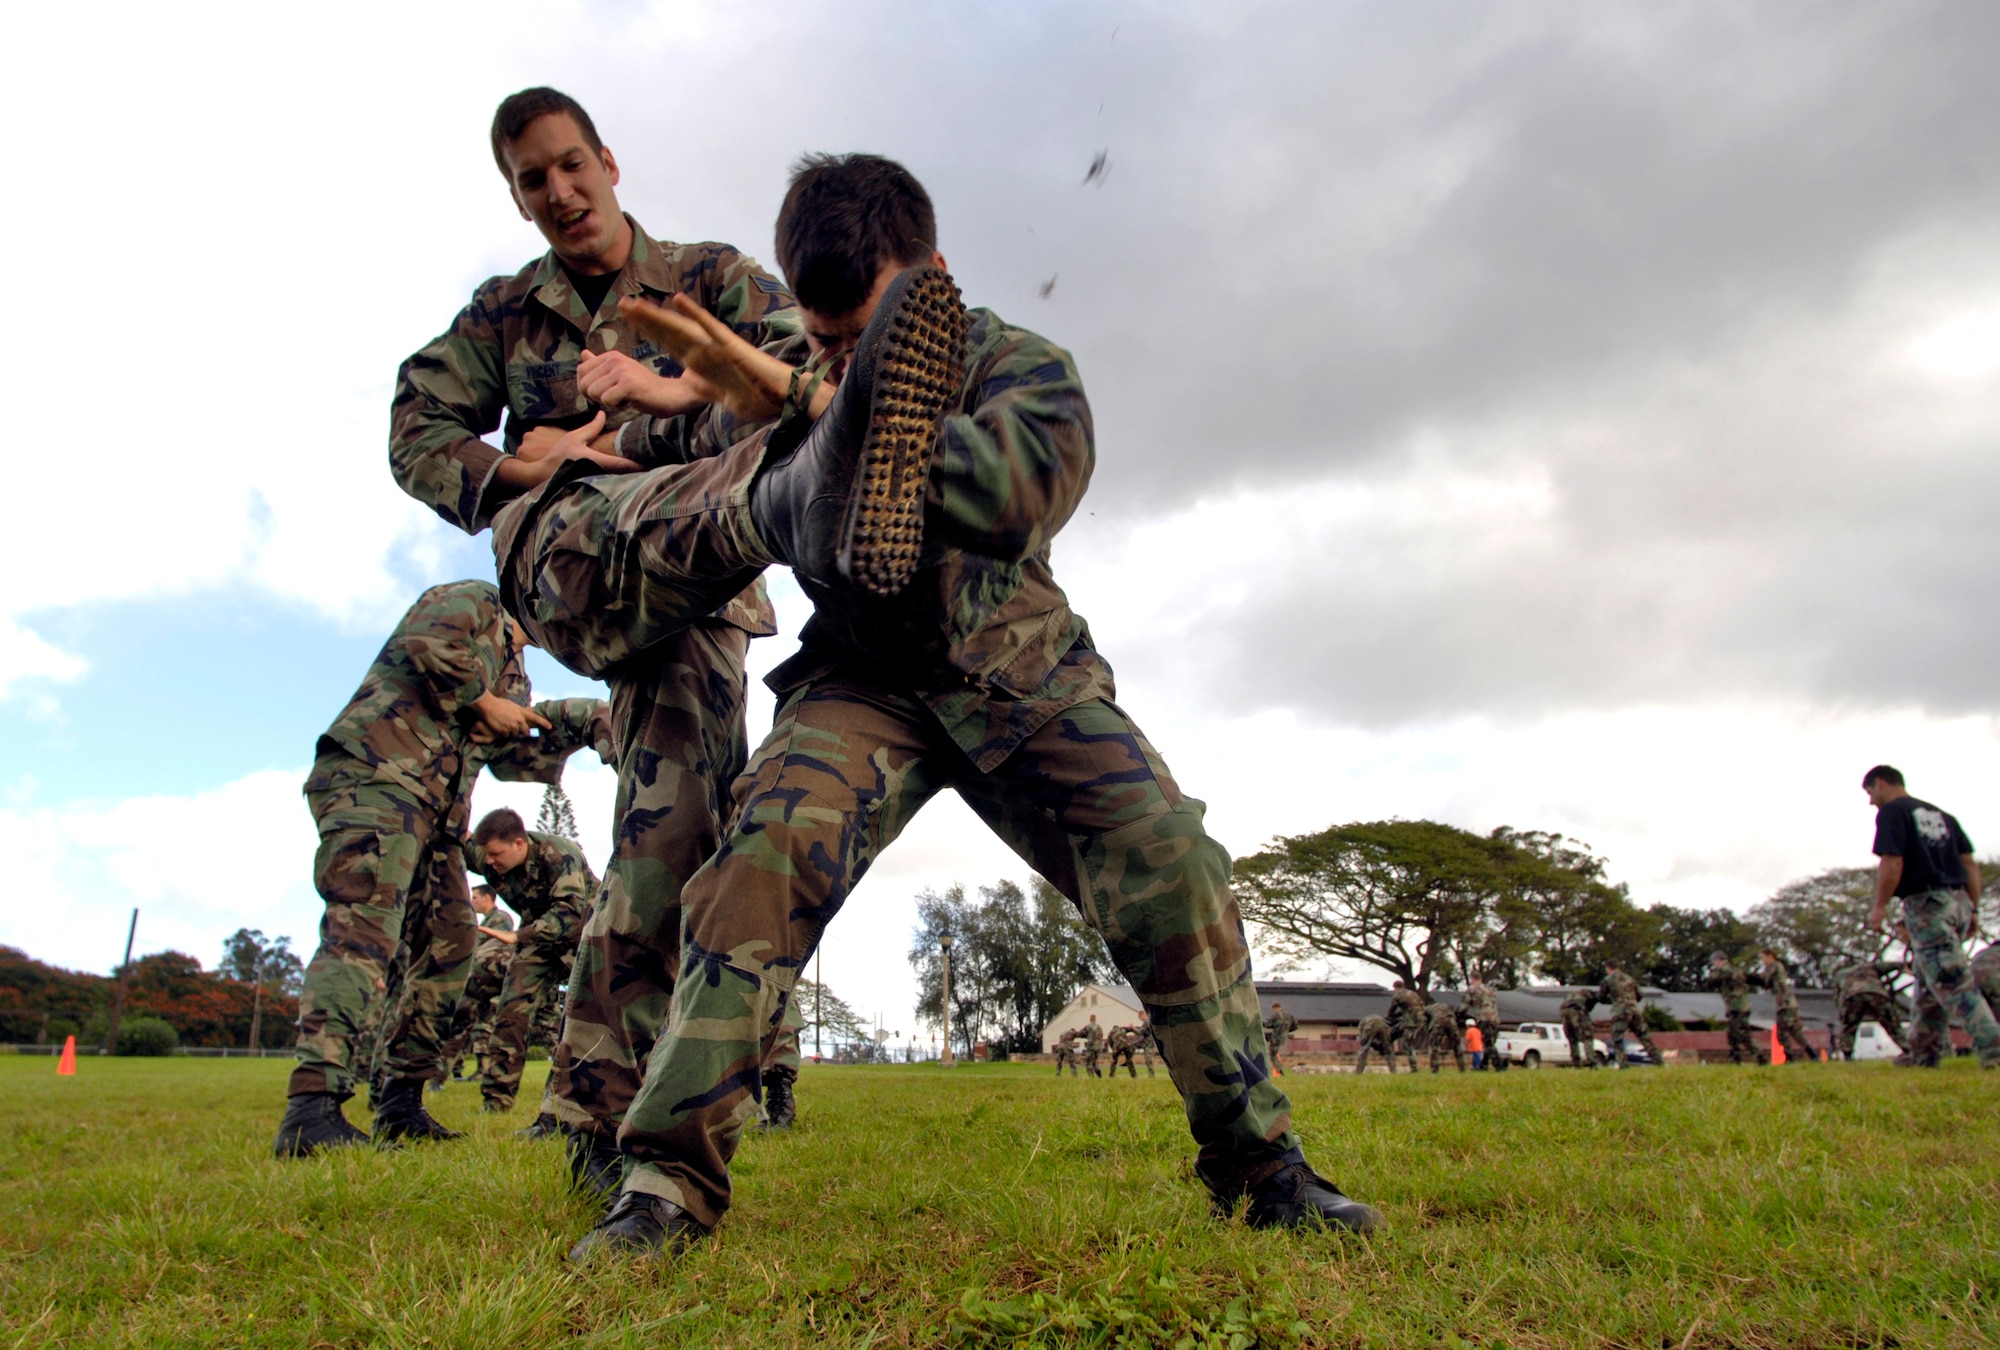 Staff Sgt. George Earhart protects his face from a kick from Senior Airman Justin Vincent during close-combat skills training Thursday, April 13, 2006, at Wheeler Army Air Field, Hawaii. Airman Vincent and Sergeant Earhart are tactical air controllers from the 25th Air Support Operation Squadron. (U.S. Air Force photo/Tech. Sgt. Shane A. Cuomo)